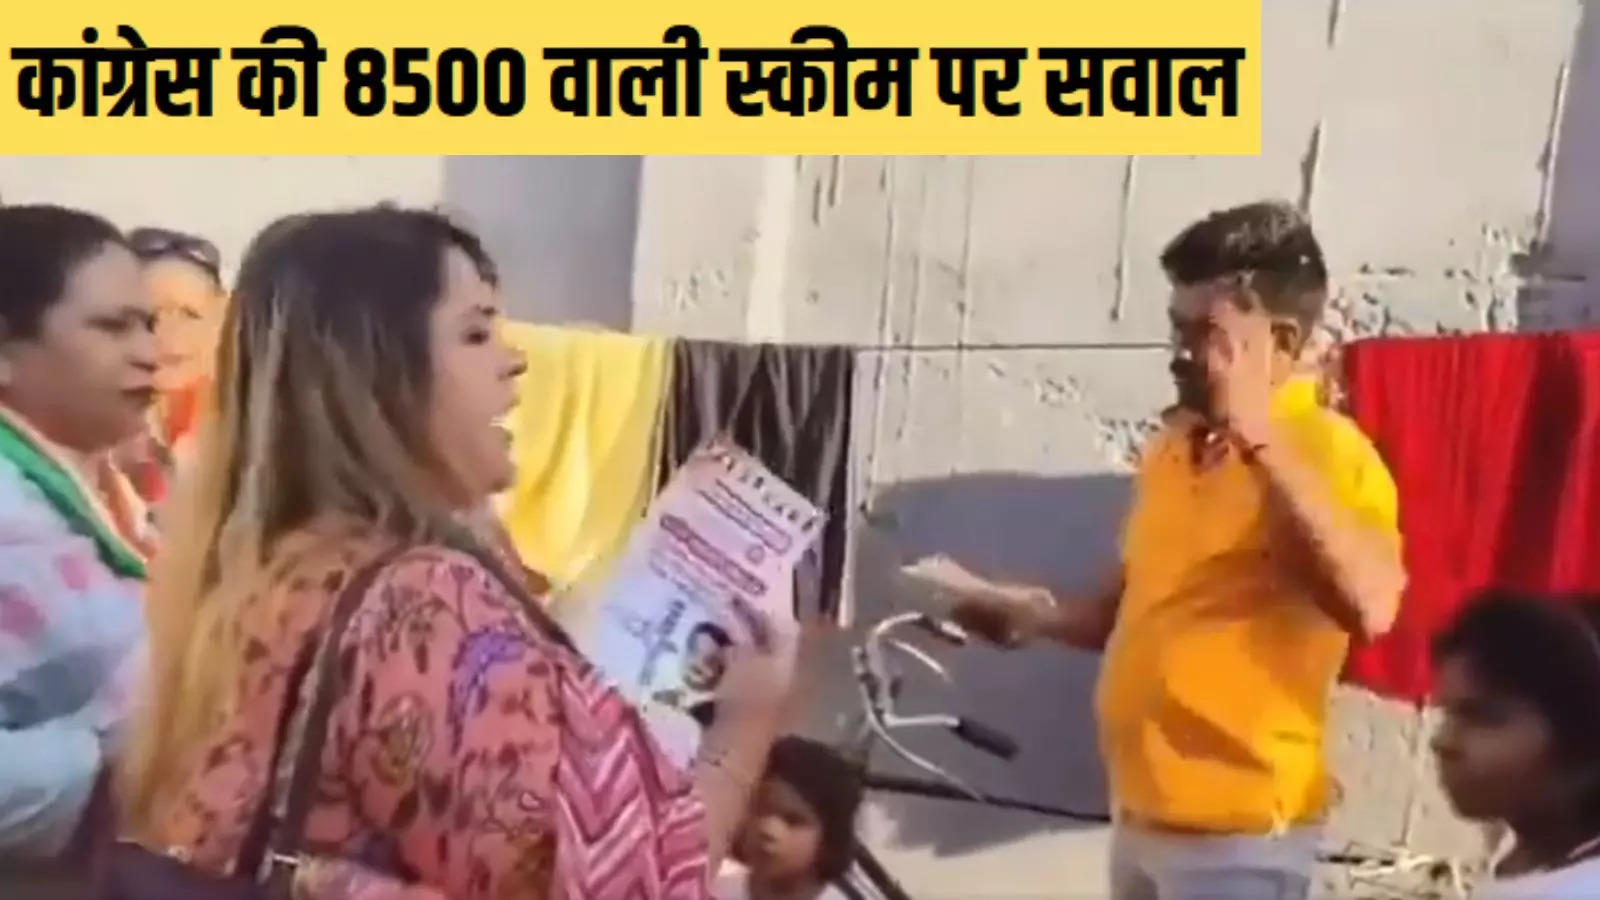 What did the Congress workers explain to the voters for Rs 8500 per month, see and listen for yourself